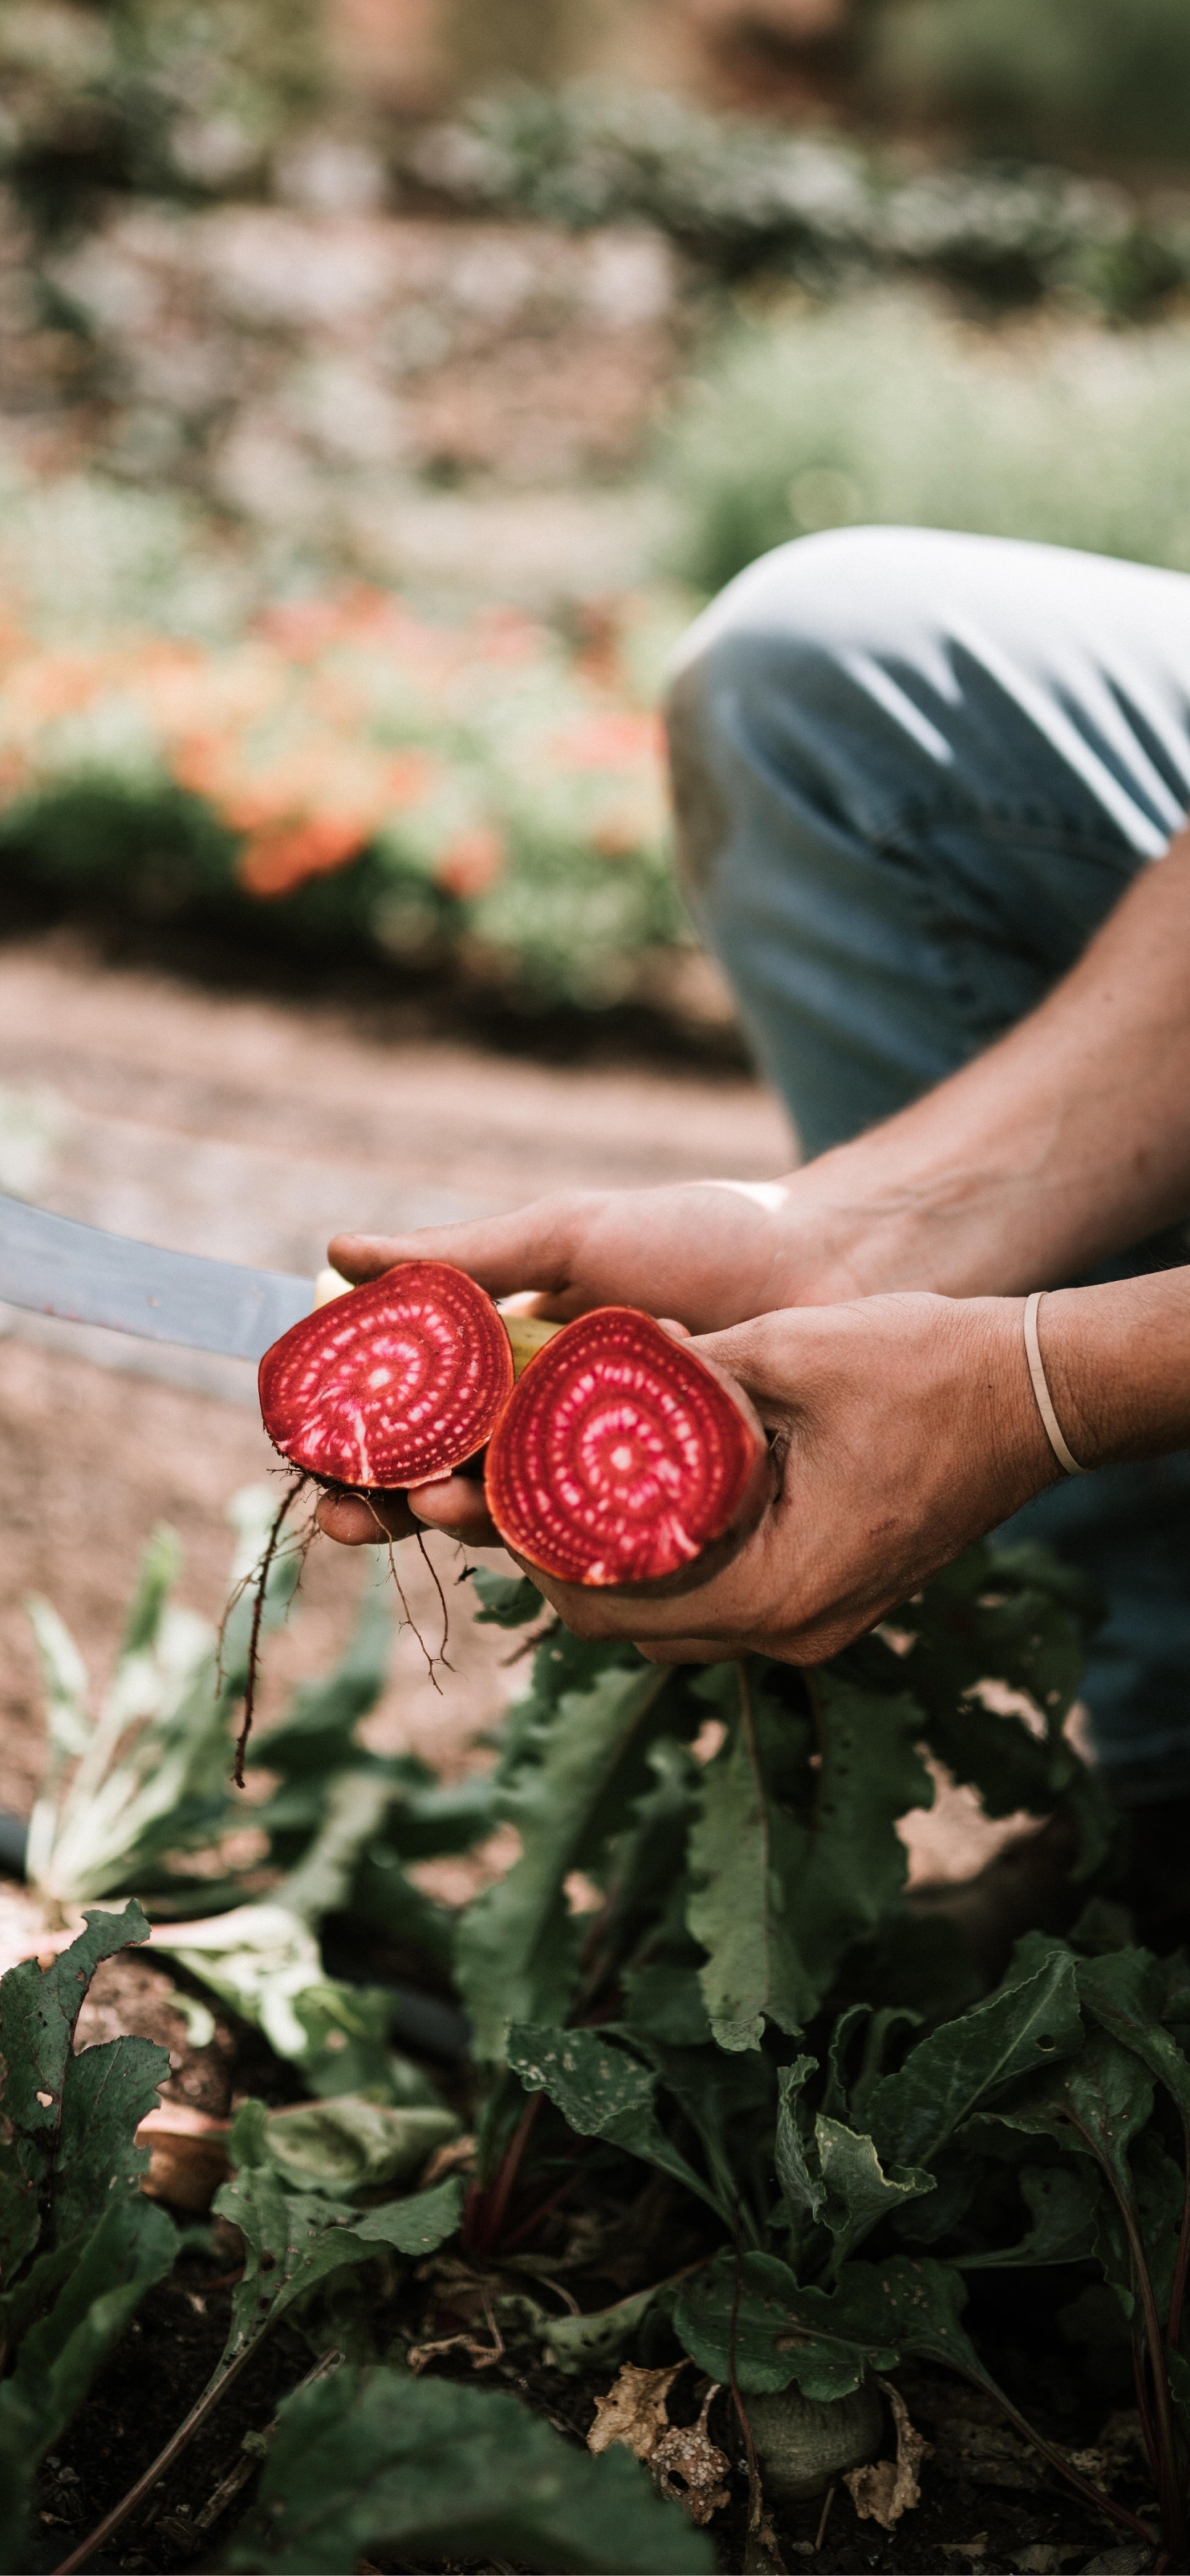 A person holding a knife and beetroot cut in half on a farm.